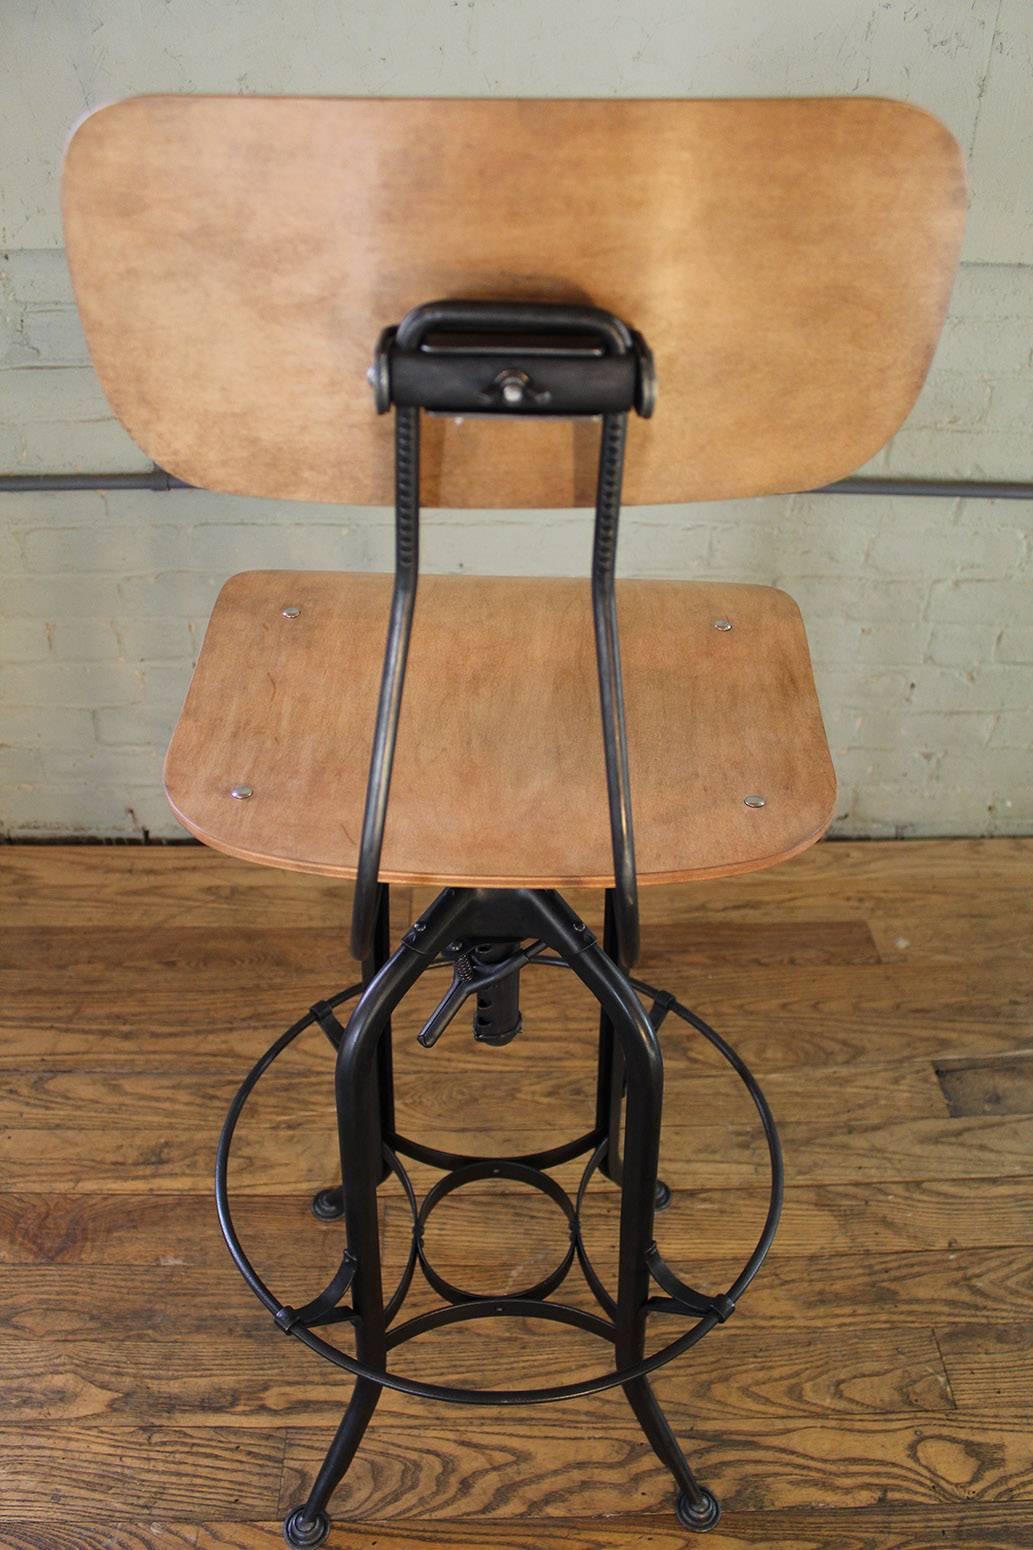 Vintage Industrial bent plywood and metal adjustable toledo bar stool, overall height ranges from 42"-47", seat height ranges from 28"-33". Footrest diameter measures 18 1/8", and sits 13" in height.